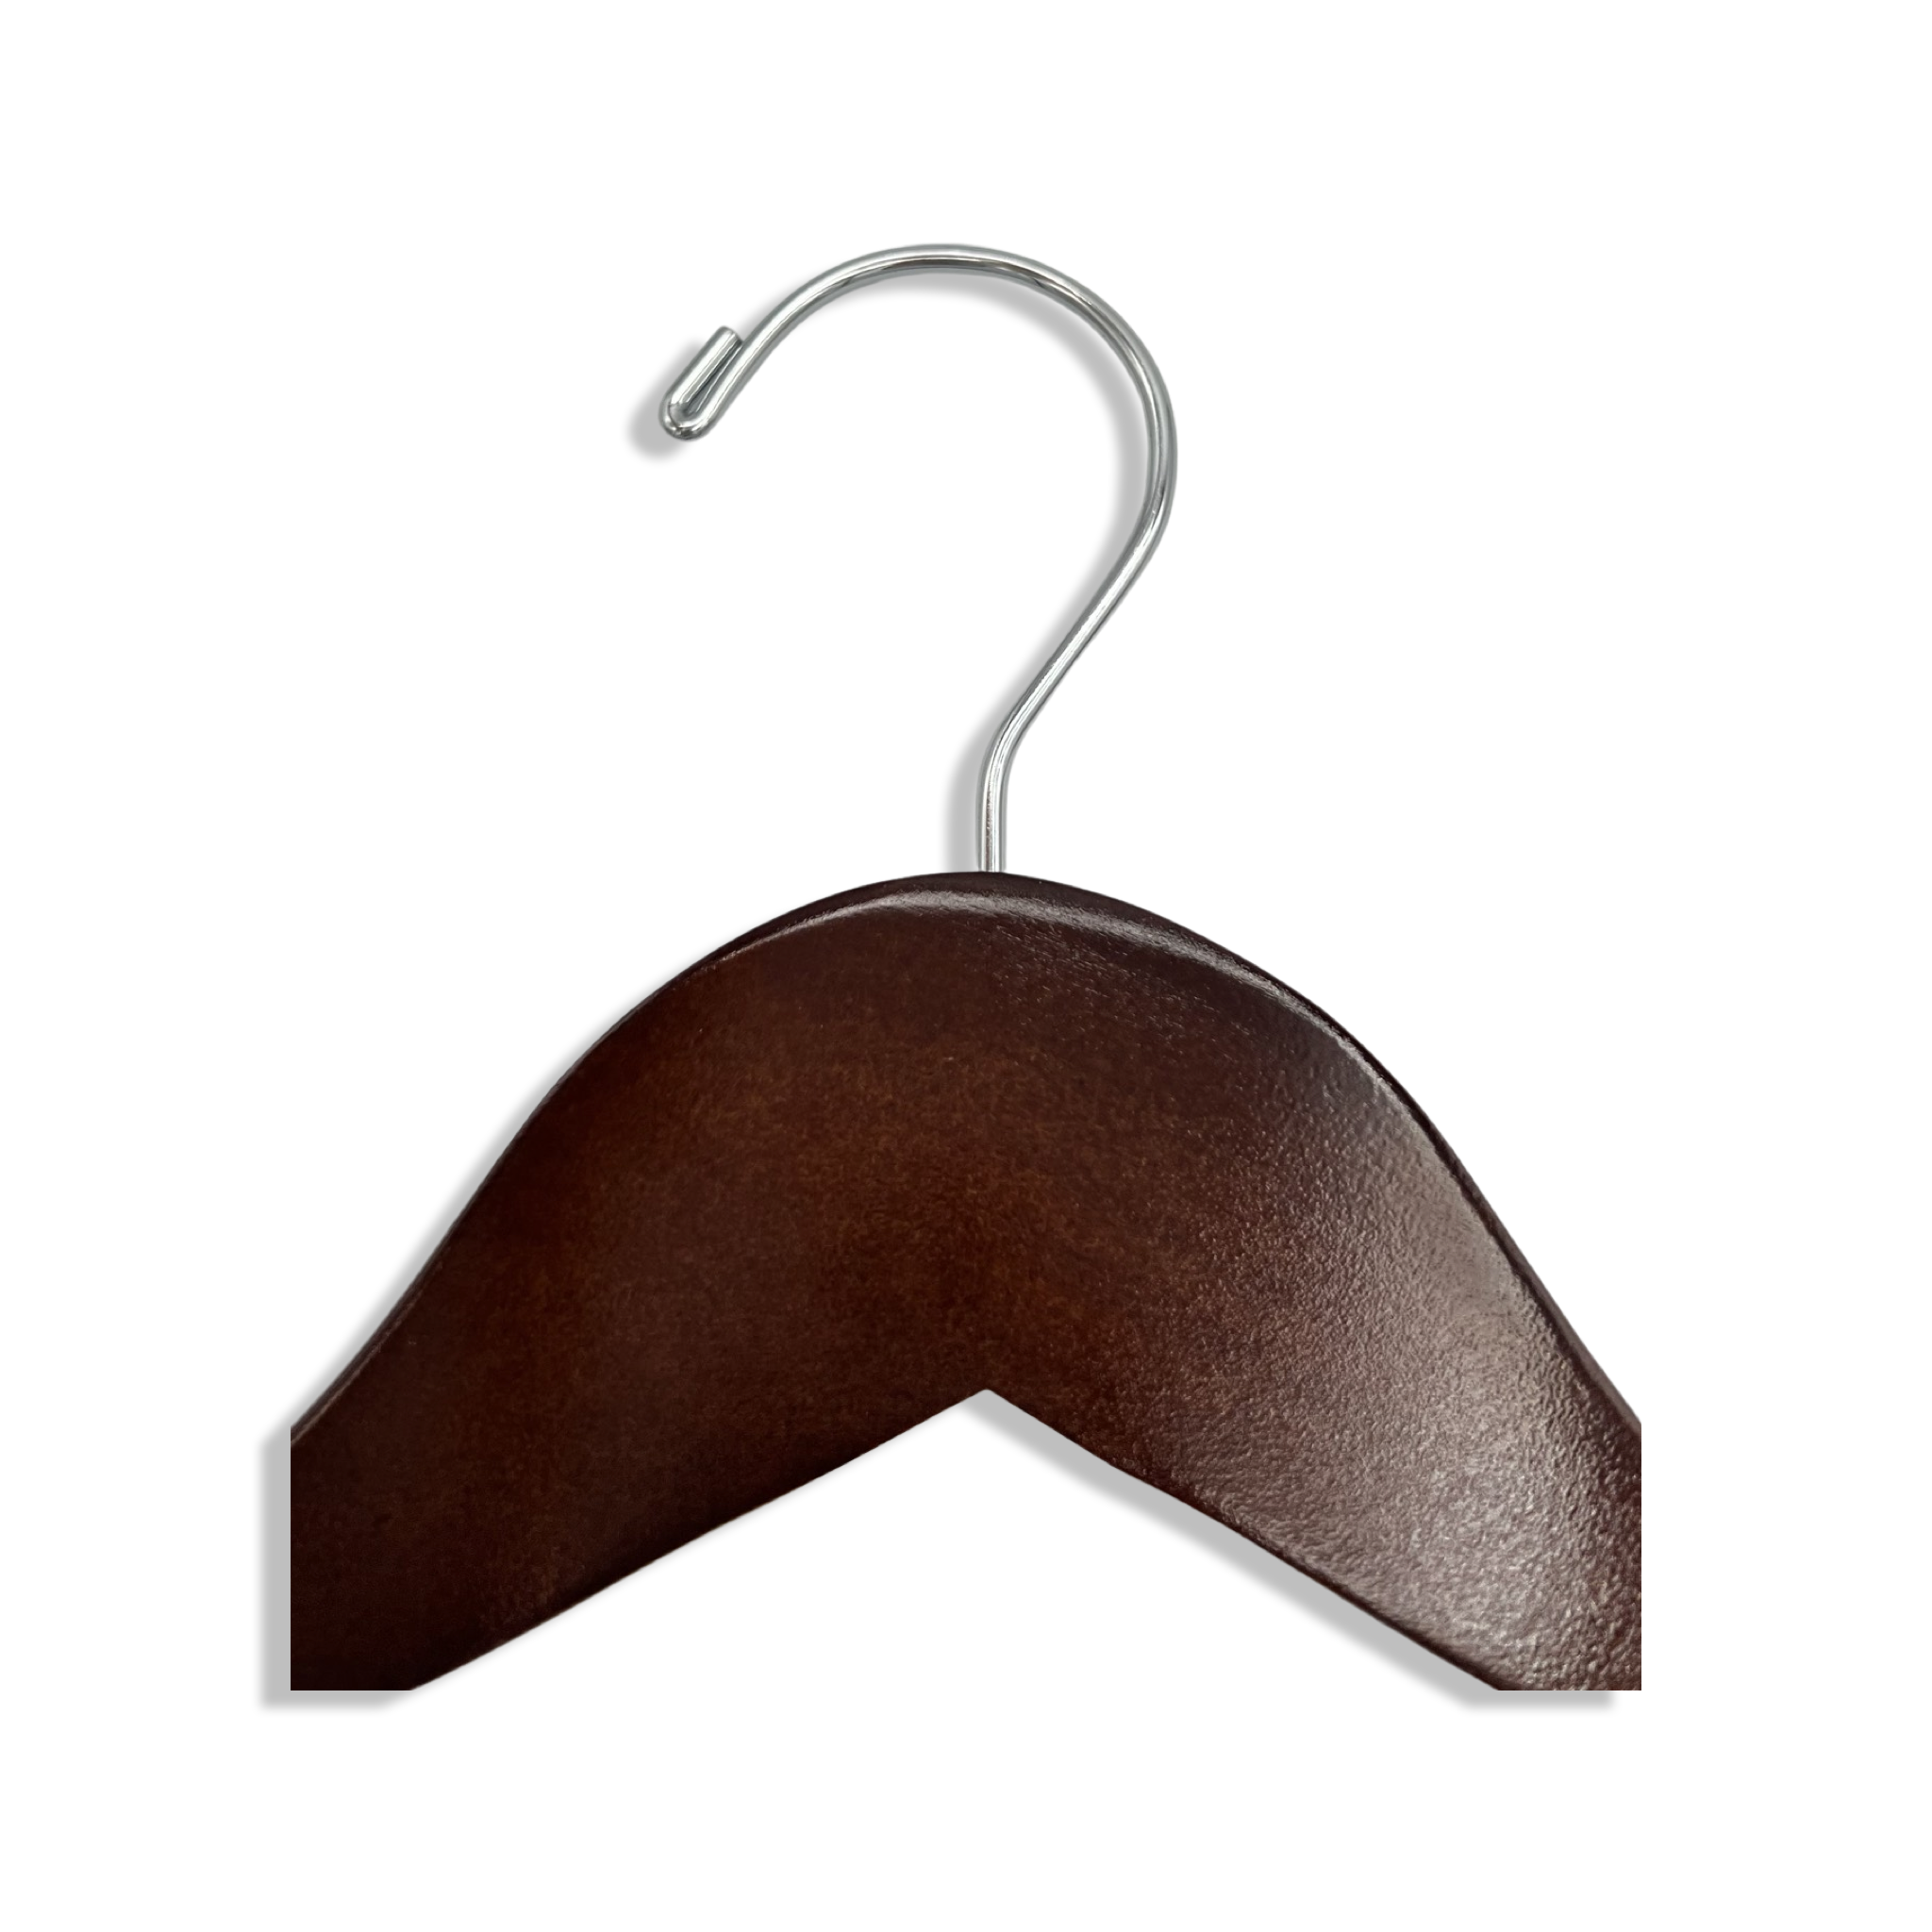 Top of a high quality Dark Walnut Wooden Combination Hanger for adults with a silver hook facing to the left